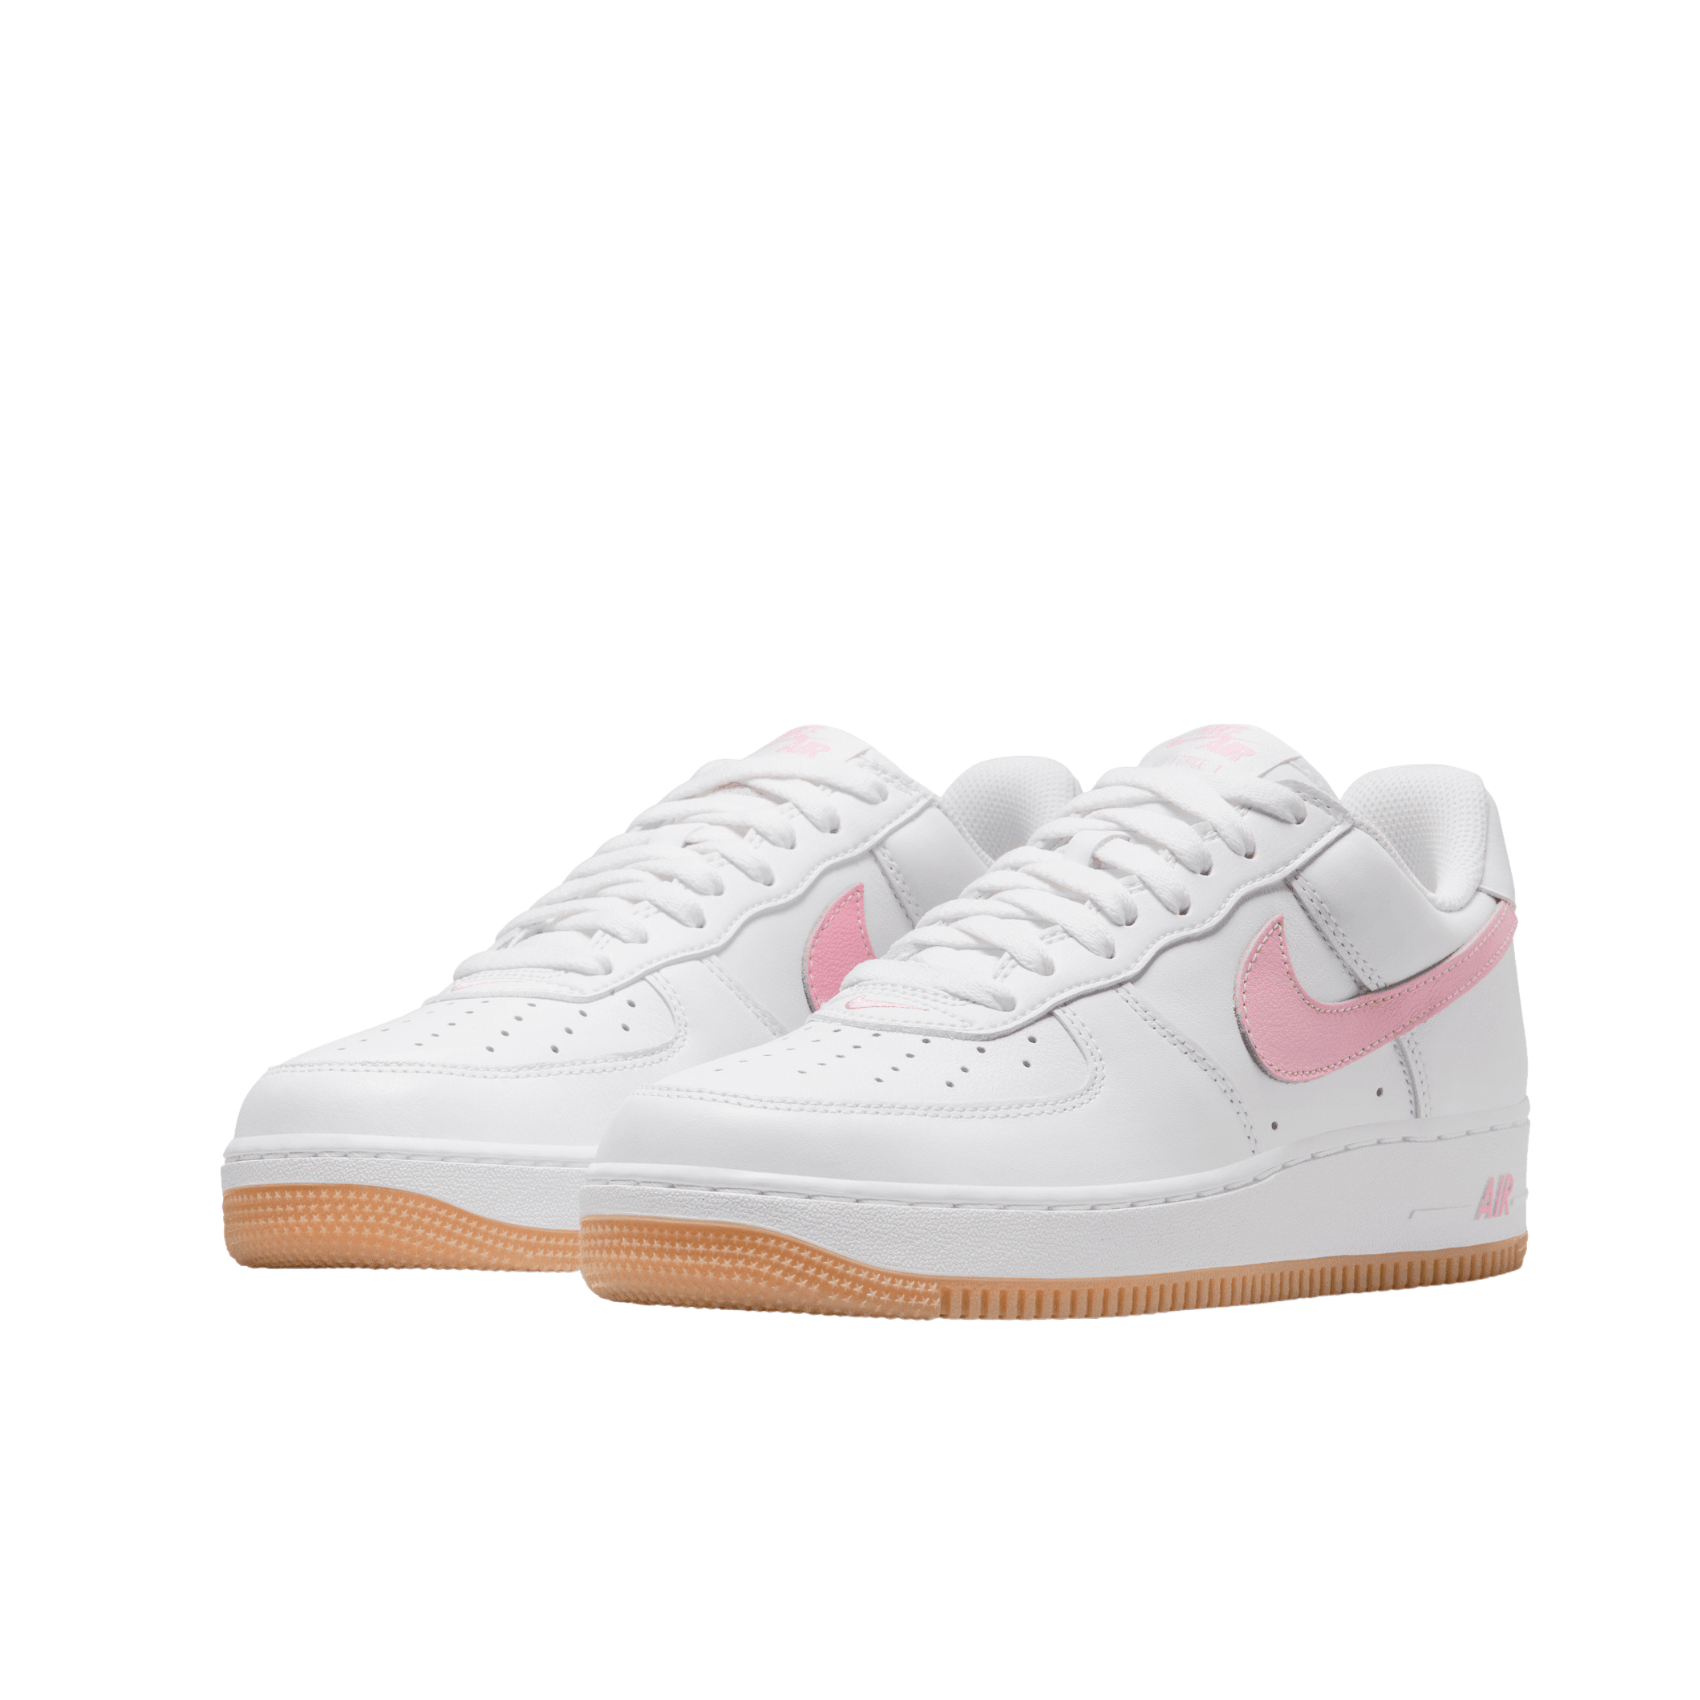 Air Force 1 Low Retro - White/Pink-Gum Yellow